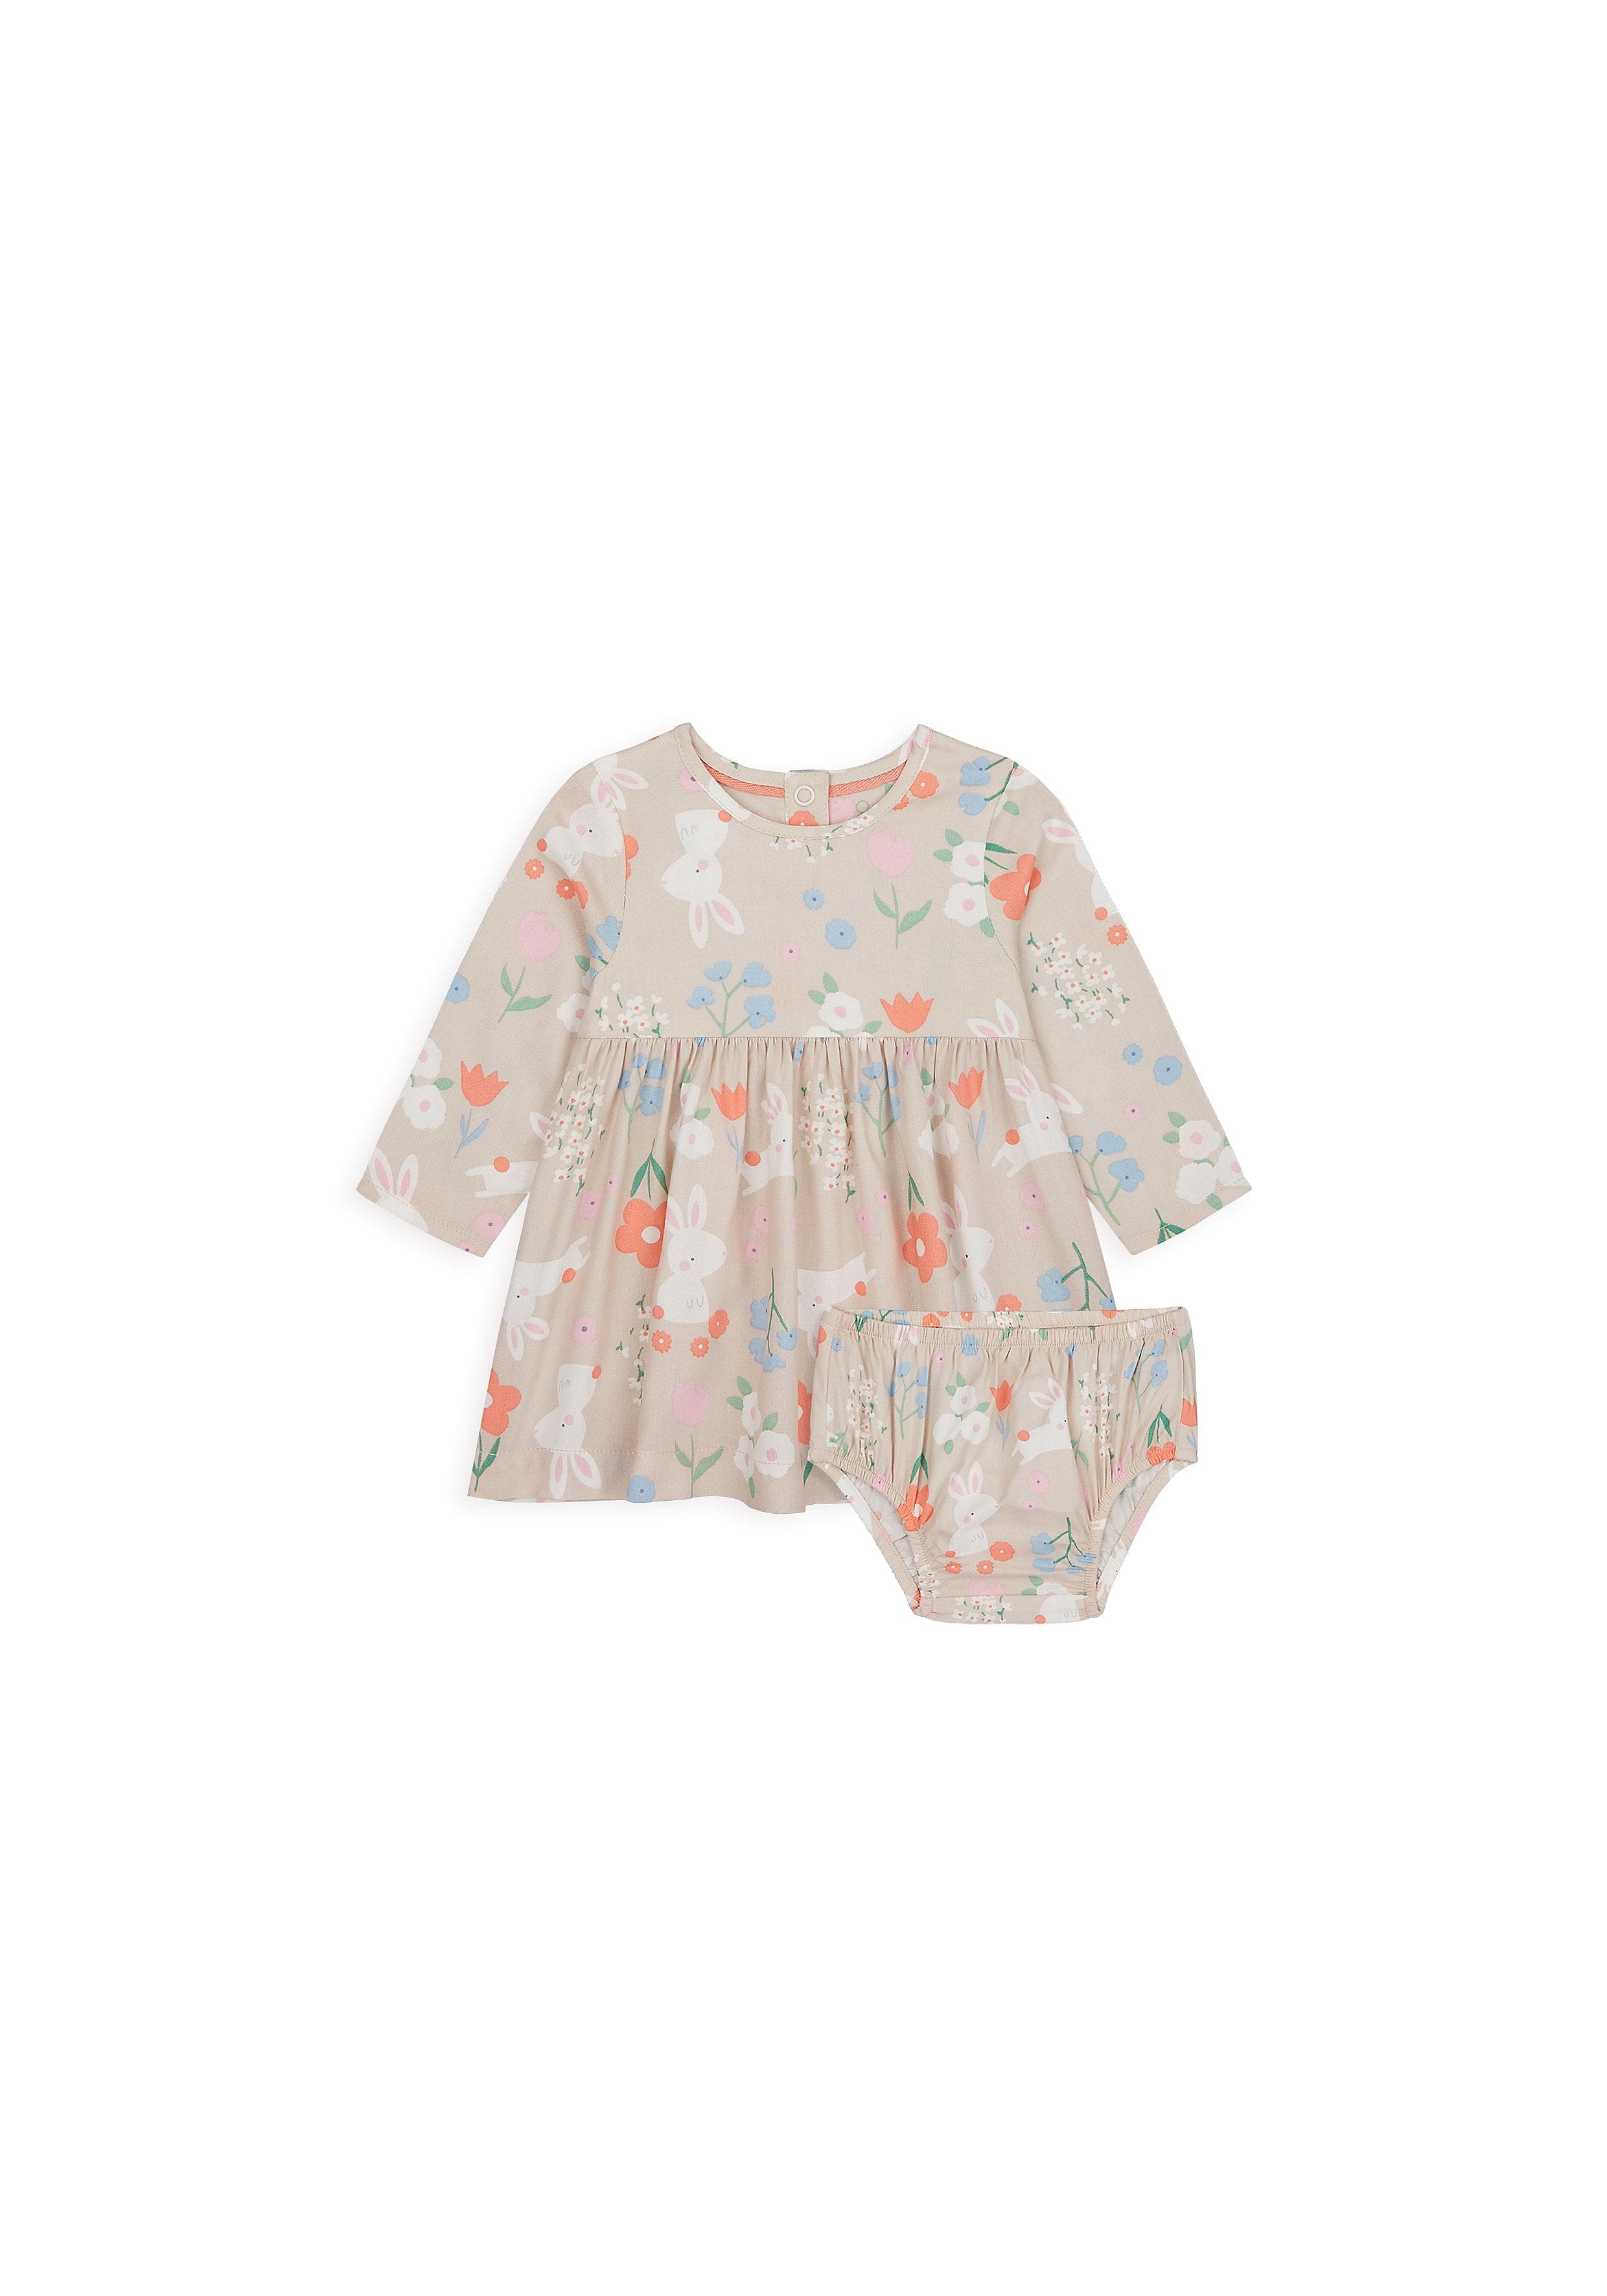 Mothercare | Girls Full Sleeves Dress And Knickers Set Bunny Print - Multicolor 0